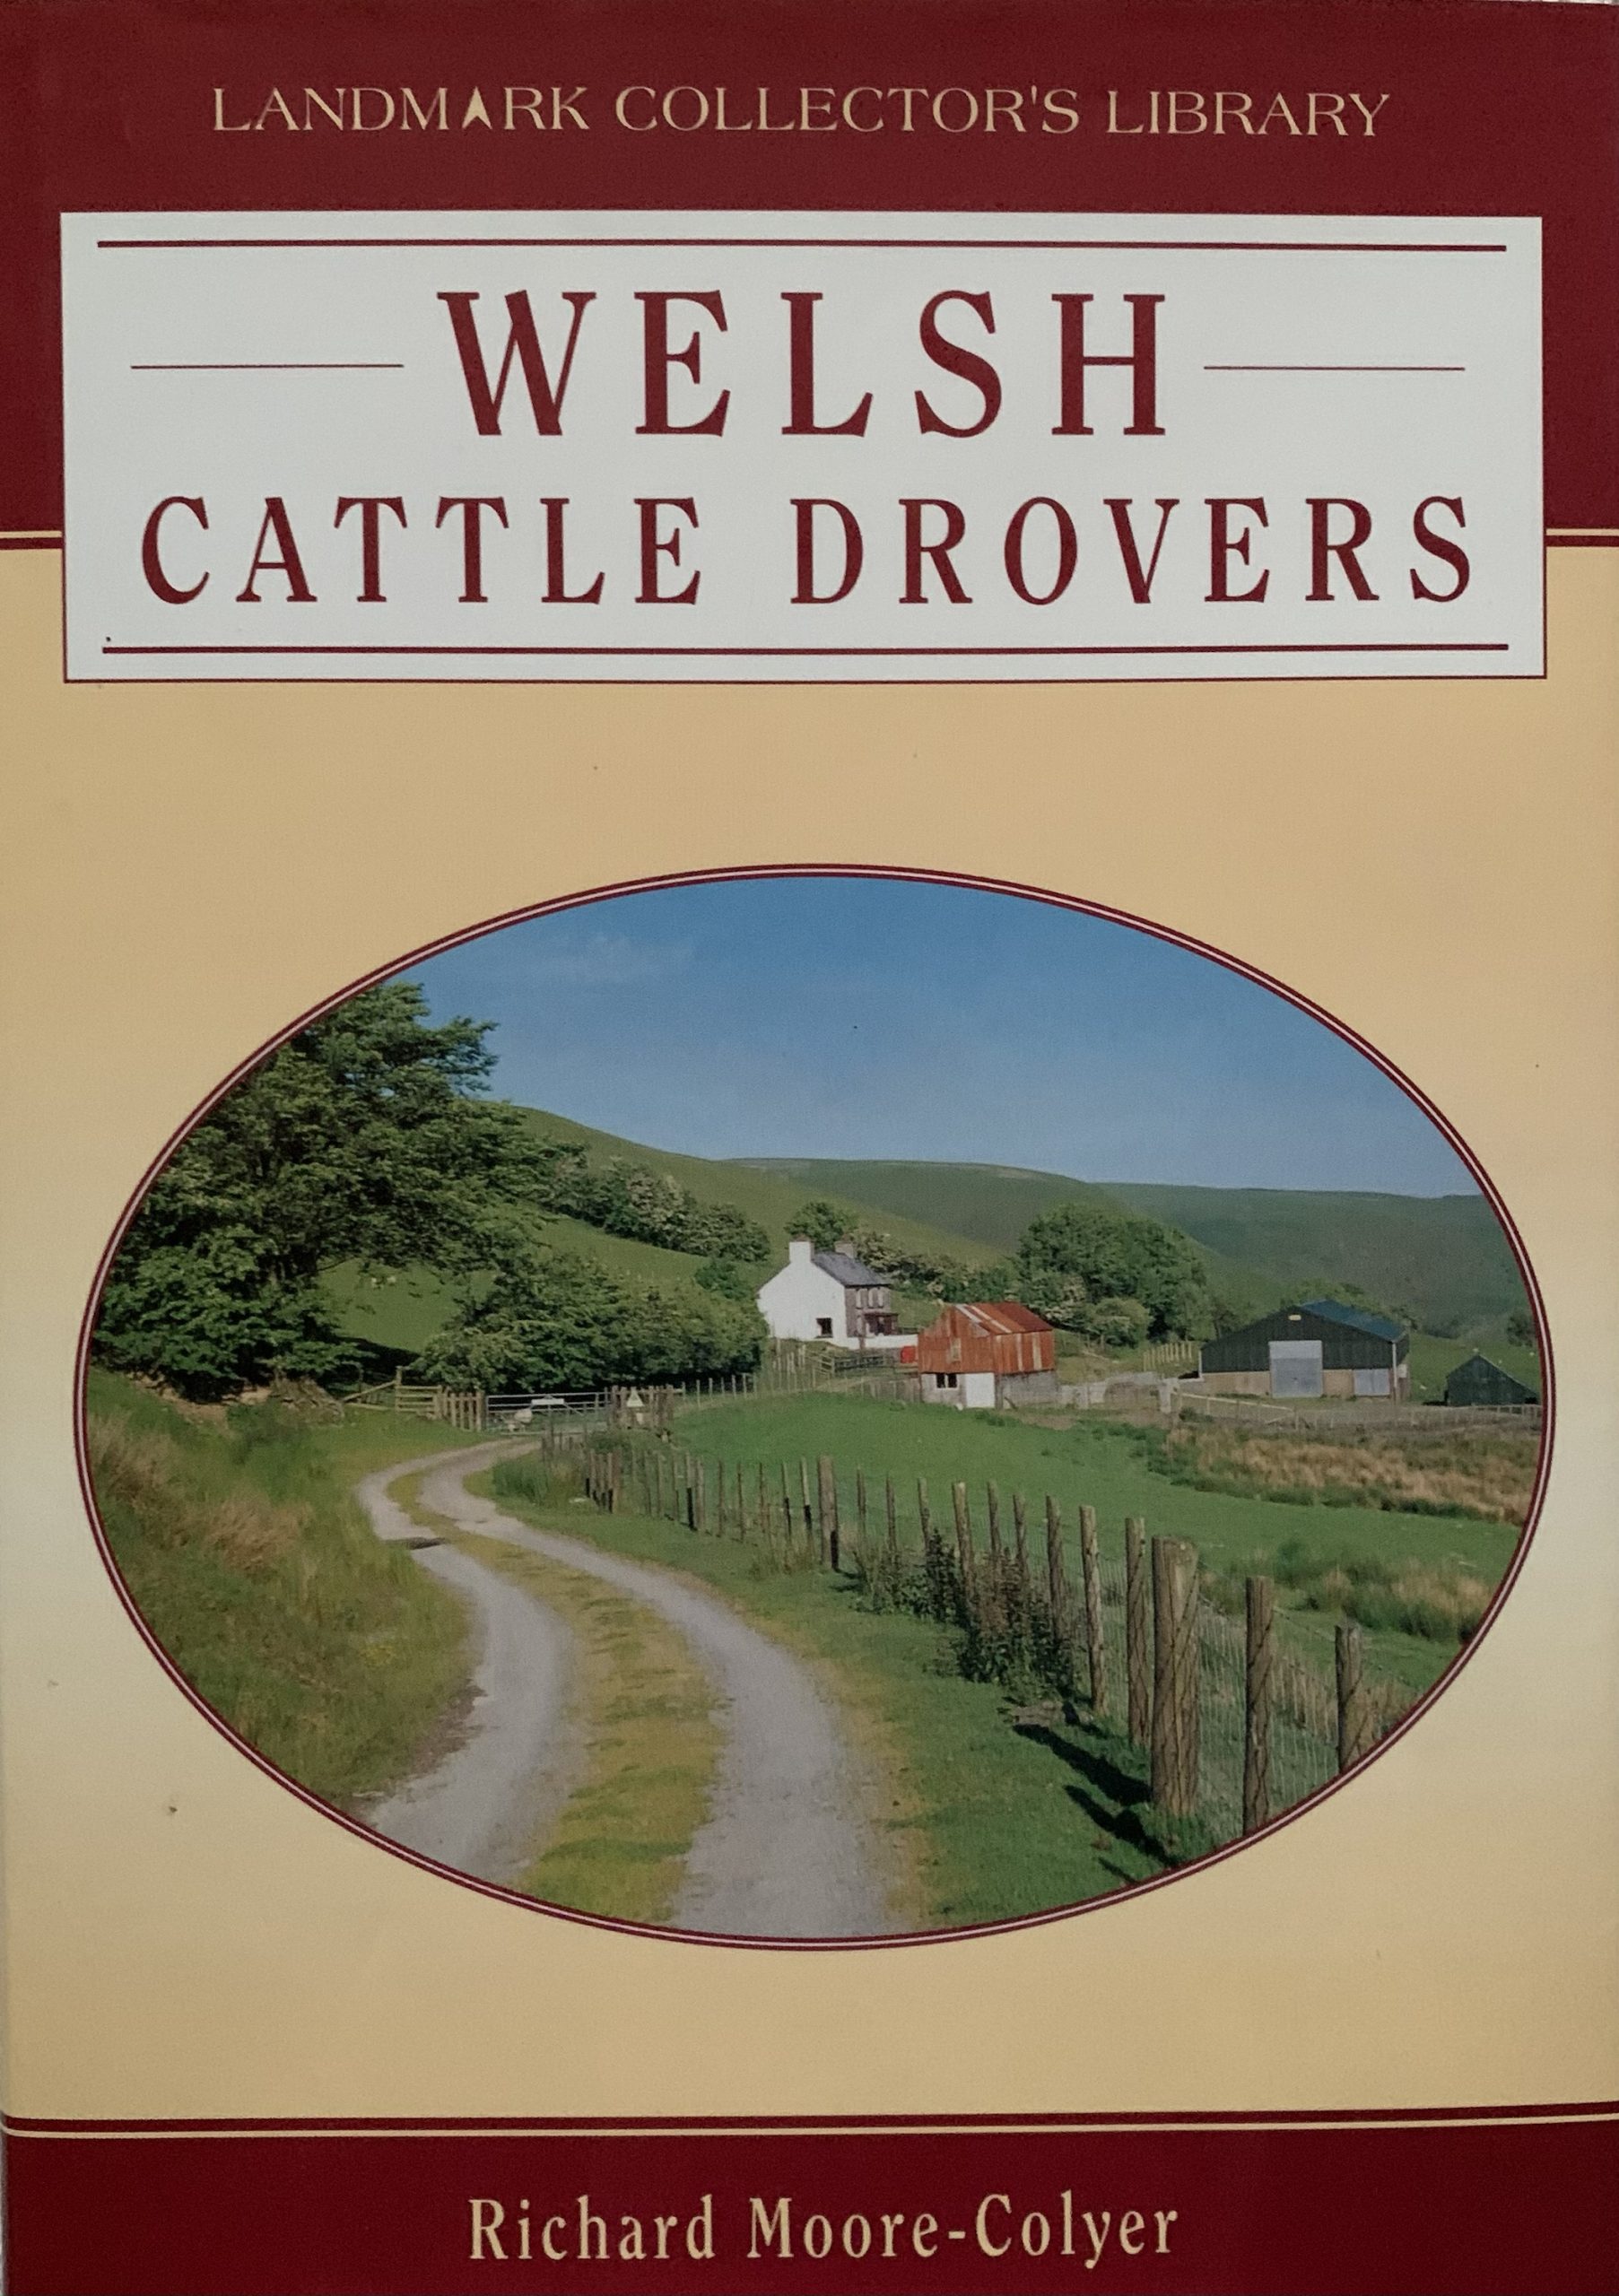 Welsh Cattle Drovers (Landmark Collector's Library) By Richard Moore-Colyer